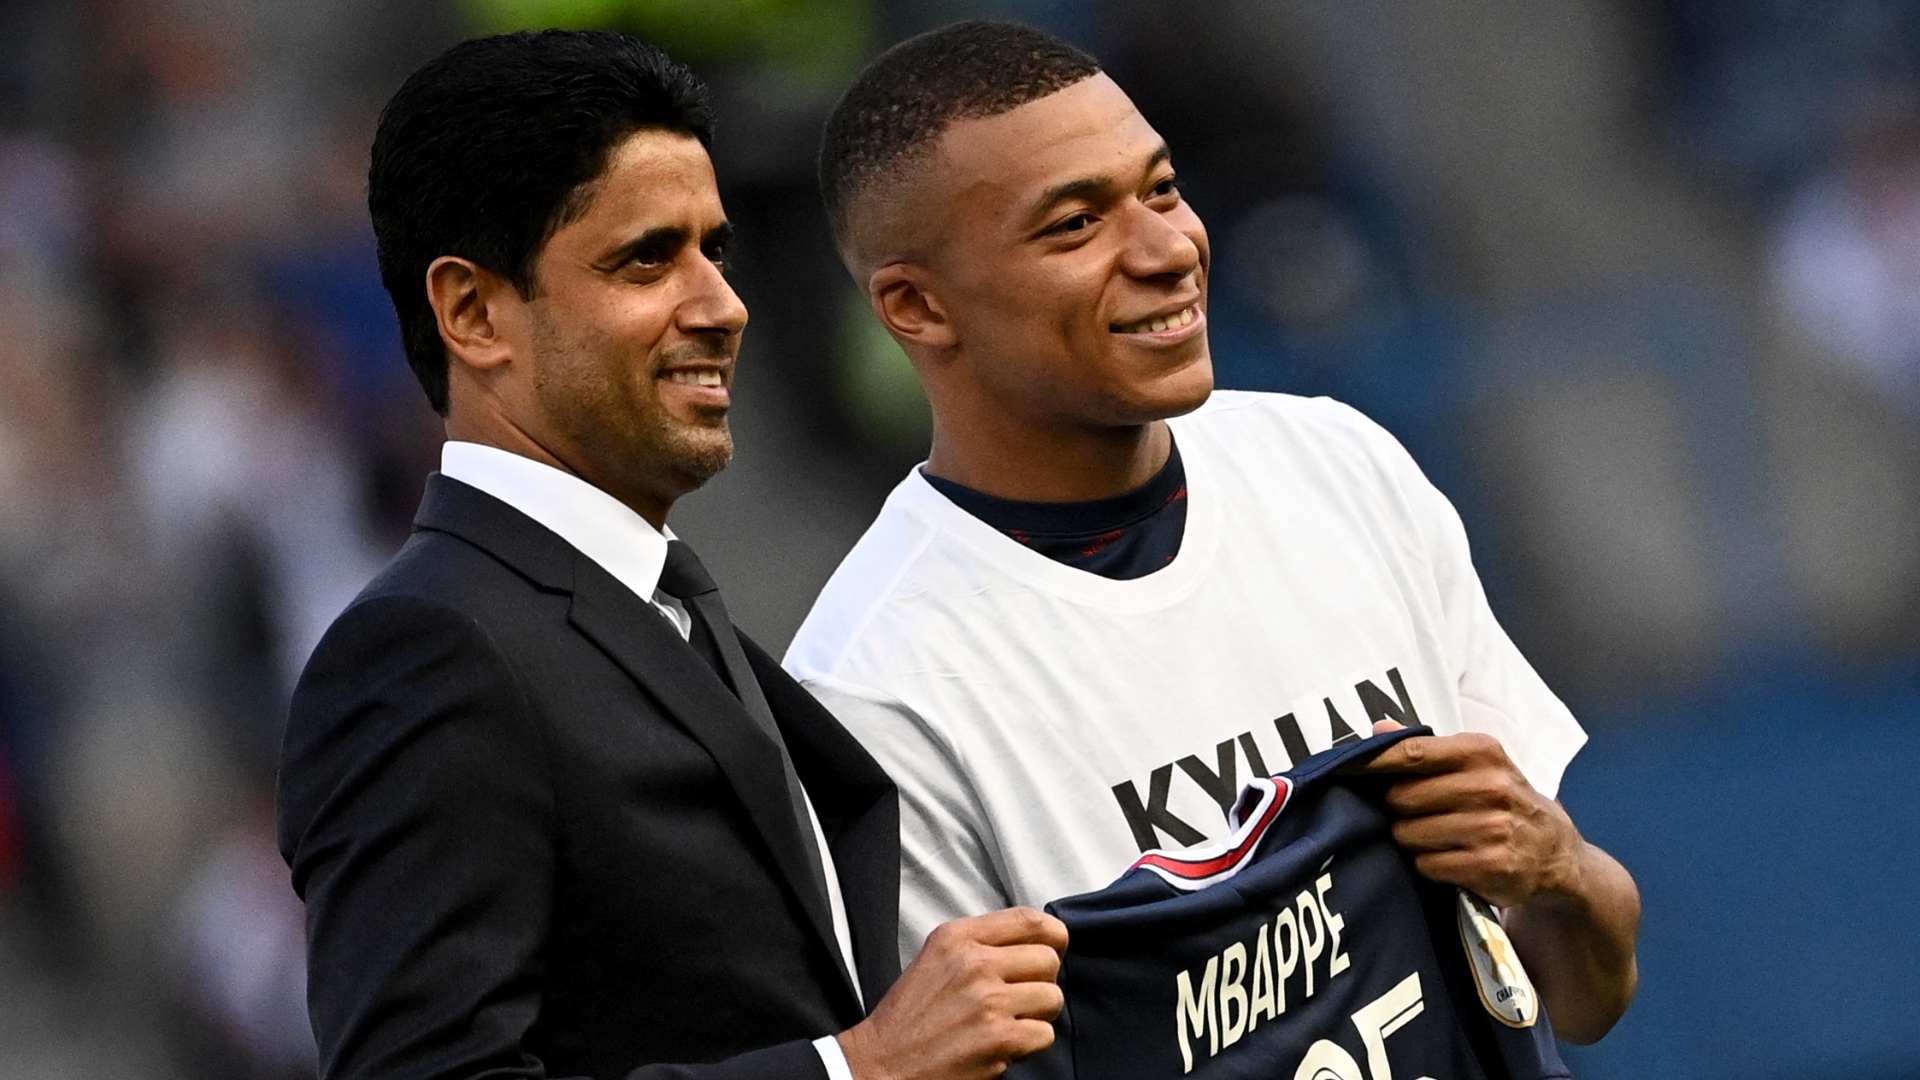 Mbappe’s new contract at PSG ‘surprised’ team-mates, reveals Herrera